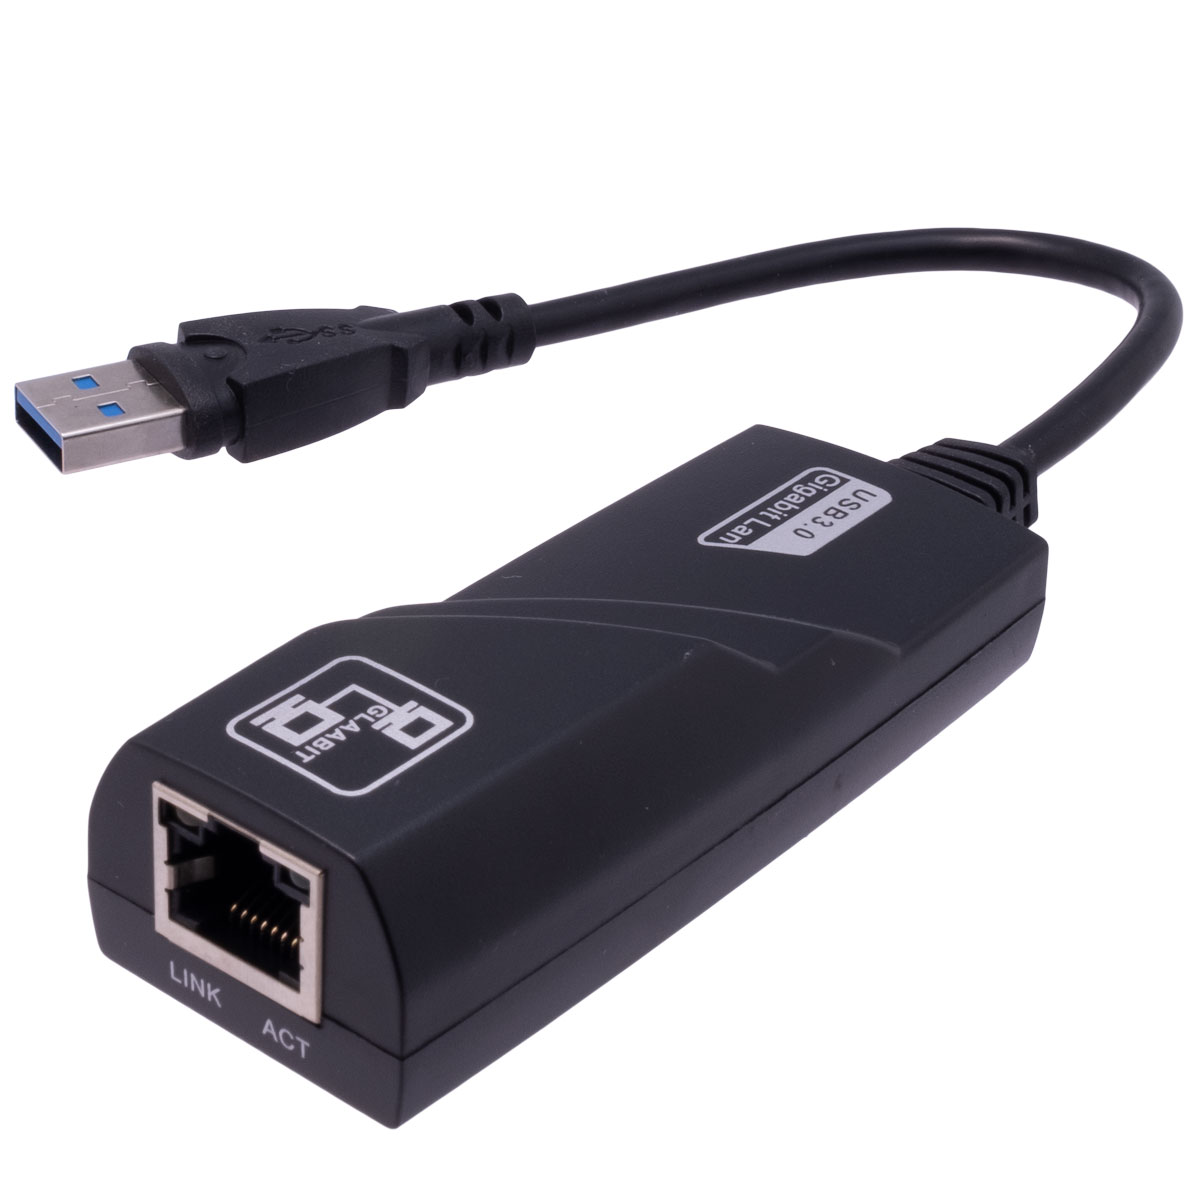 Ethernet adapter, USB 3.0 1Gbps